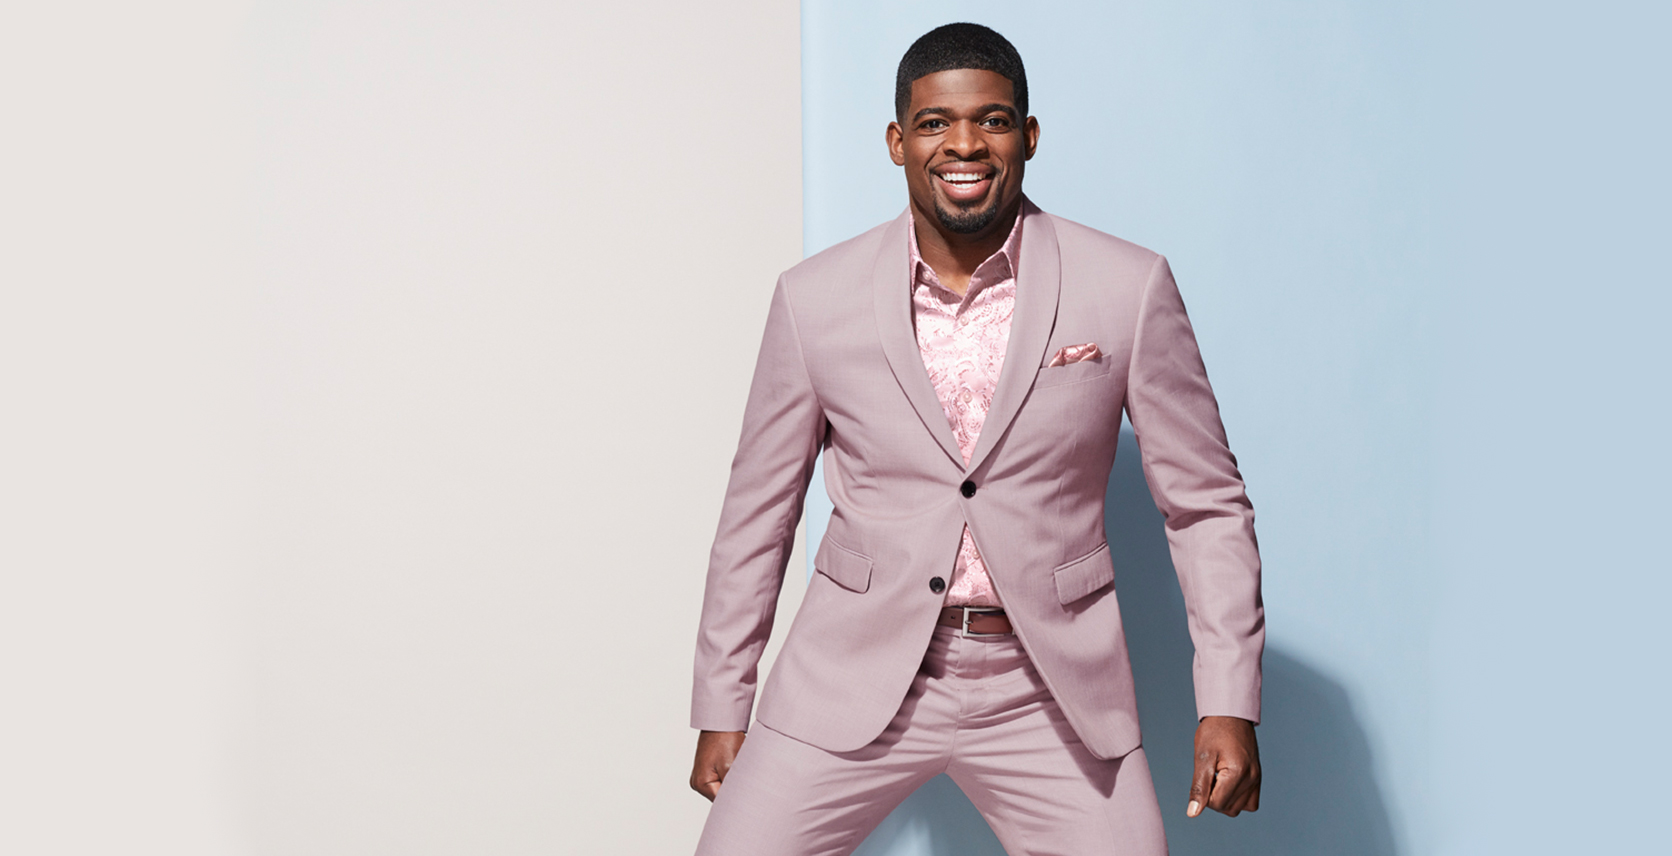 No one can top P.K. Subban's phenomenal NHL Winter Classic outfit